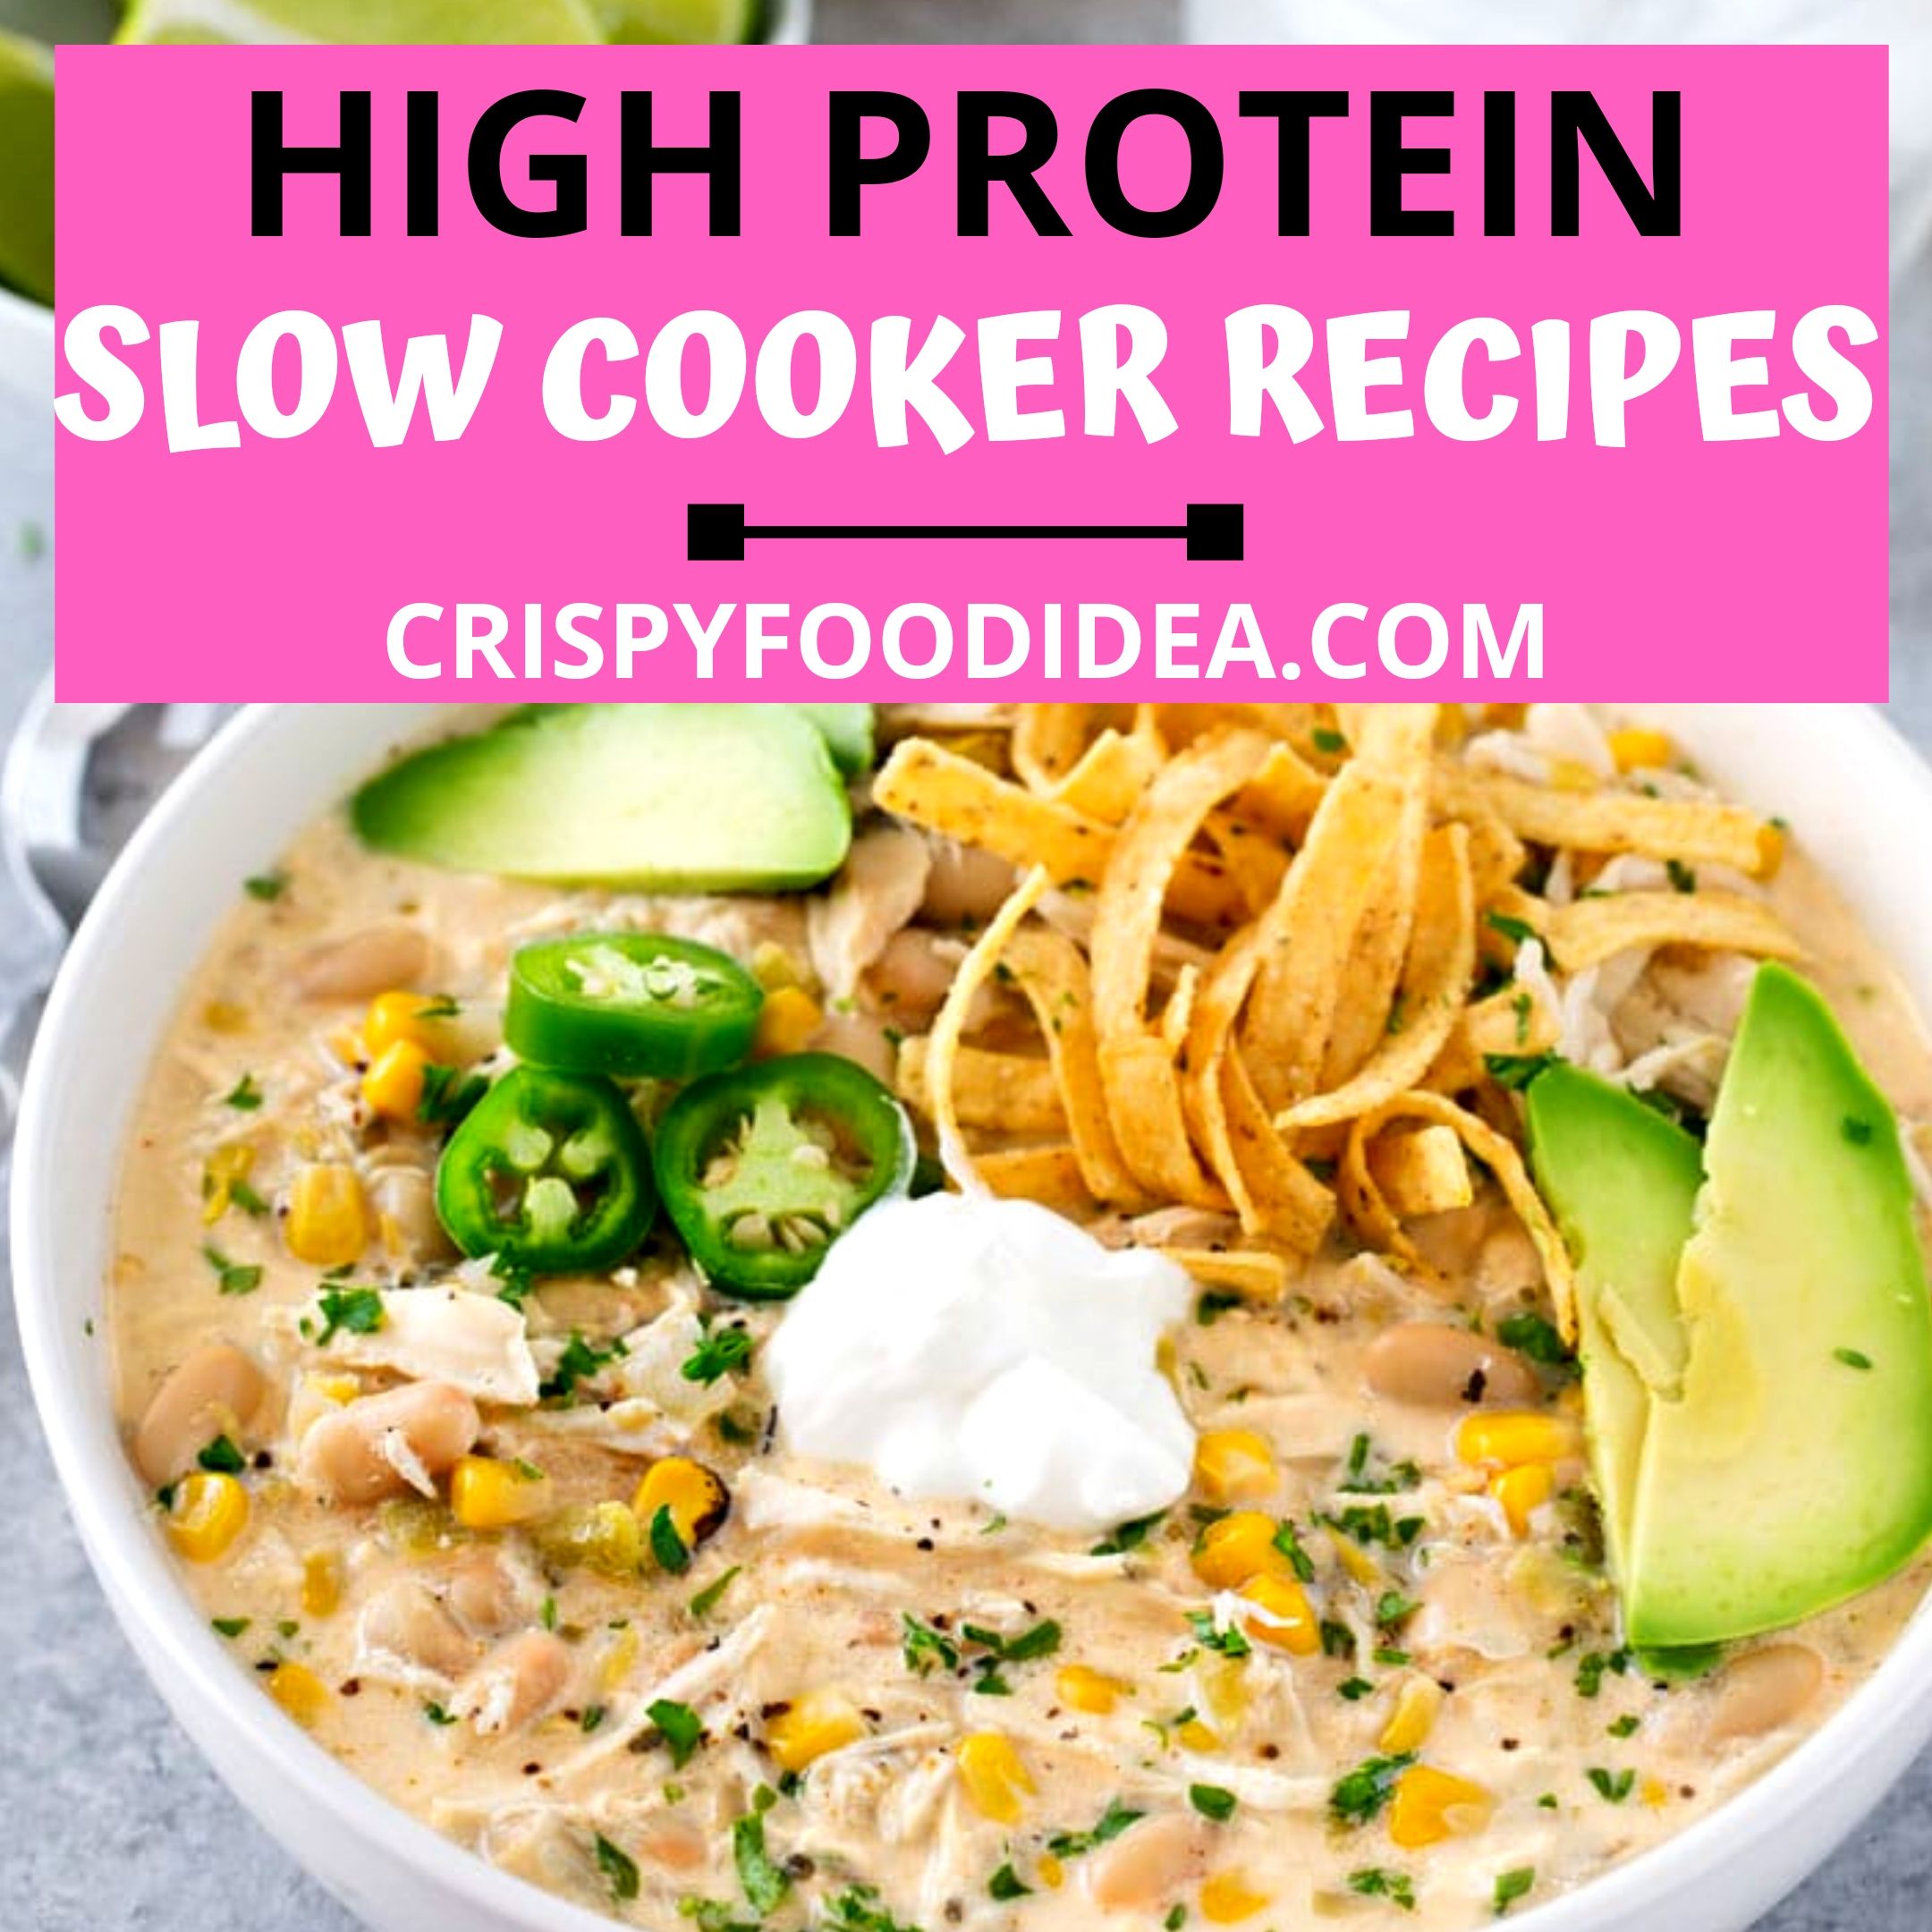 High Protein Slow Cooker Recipes